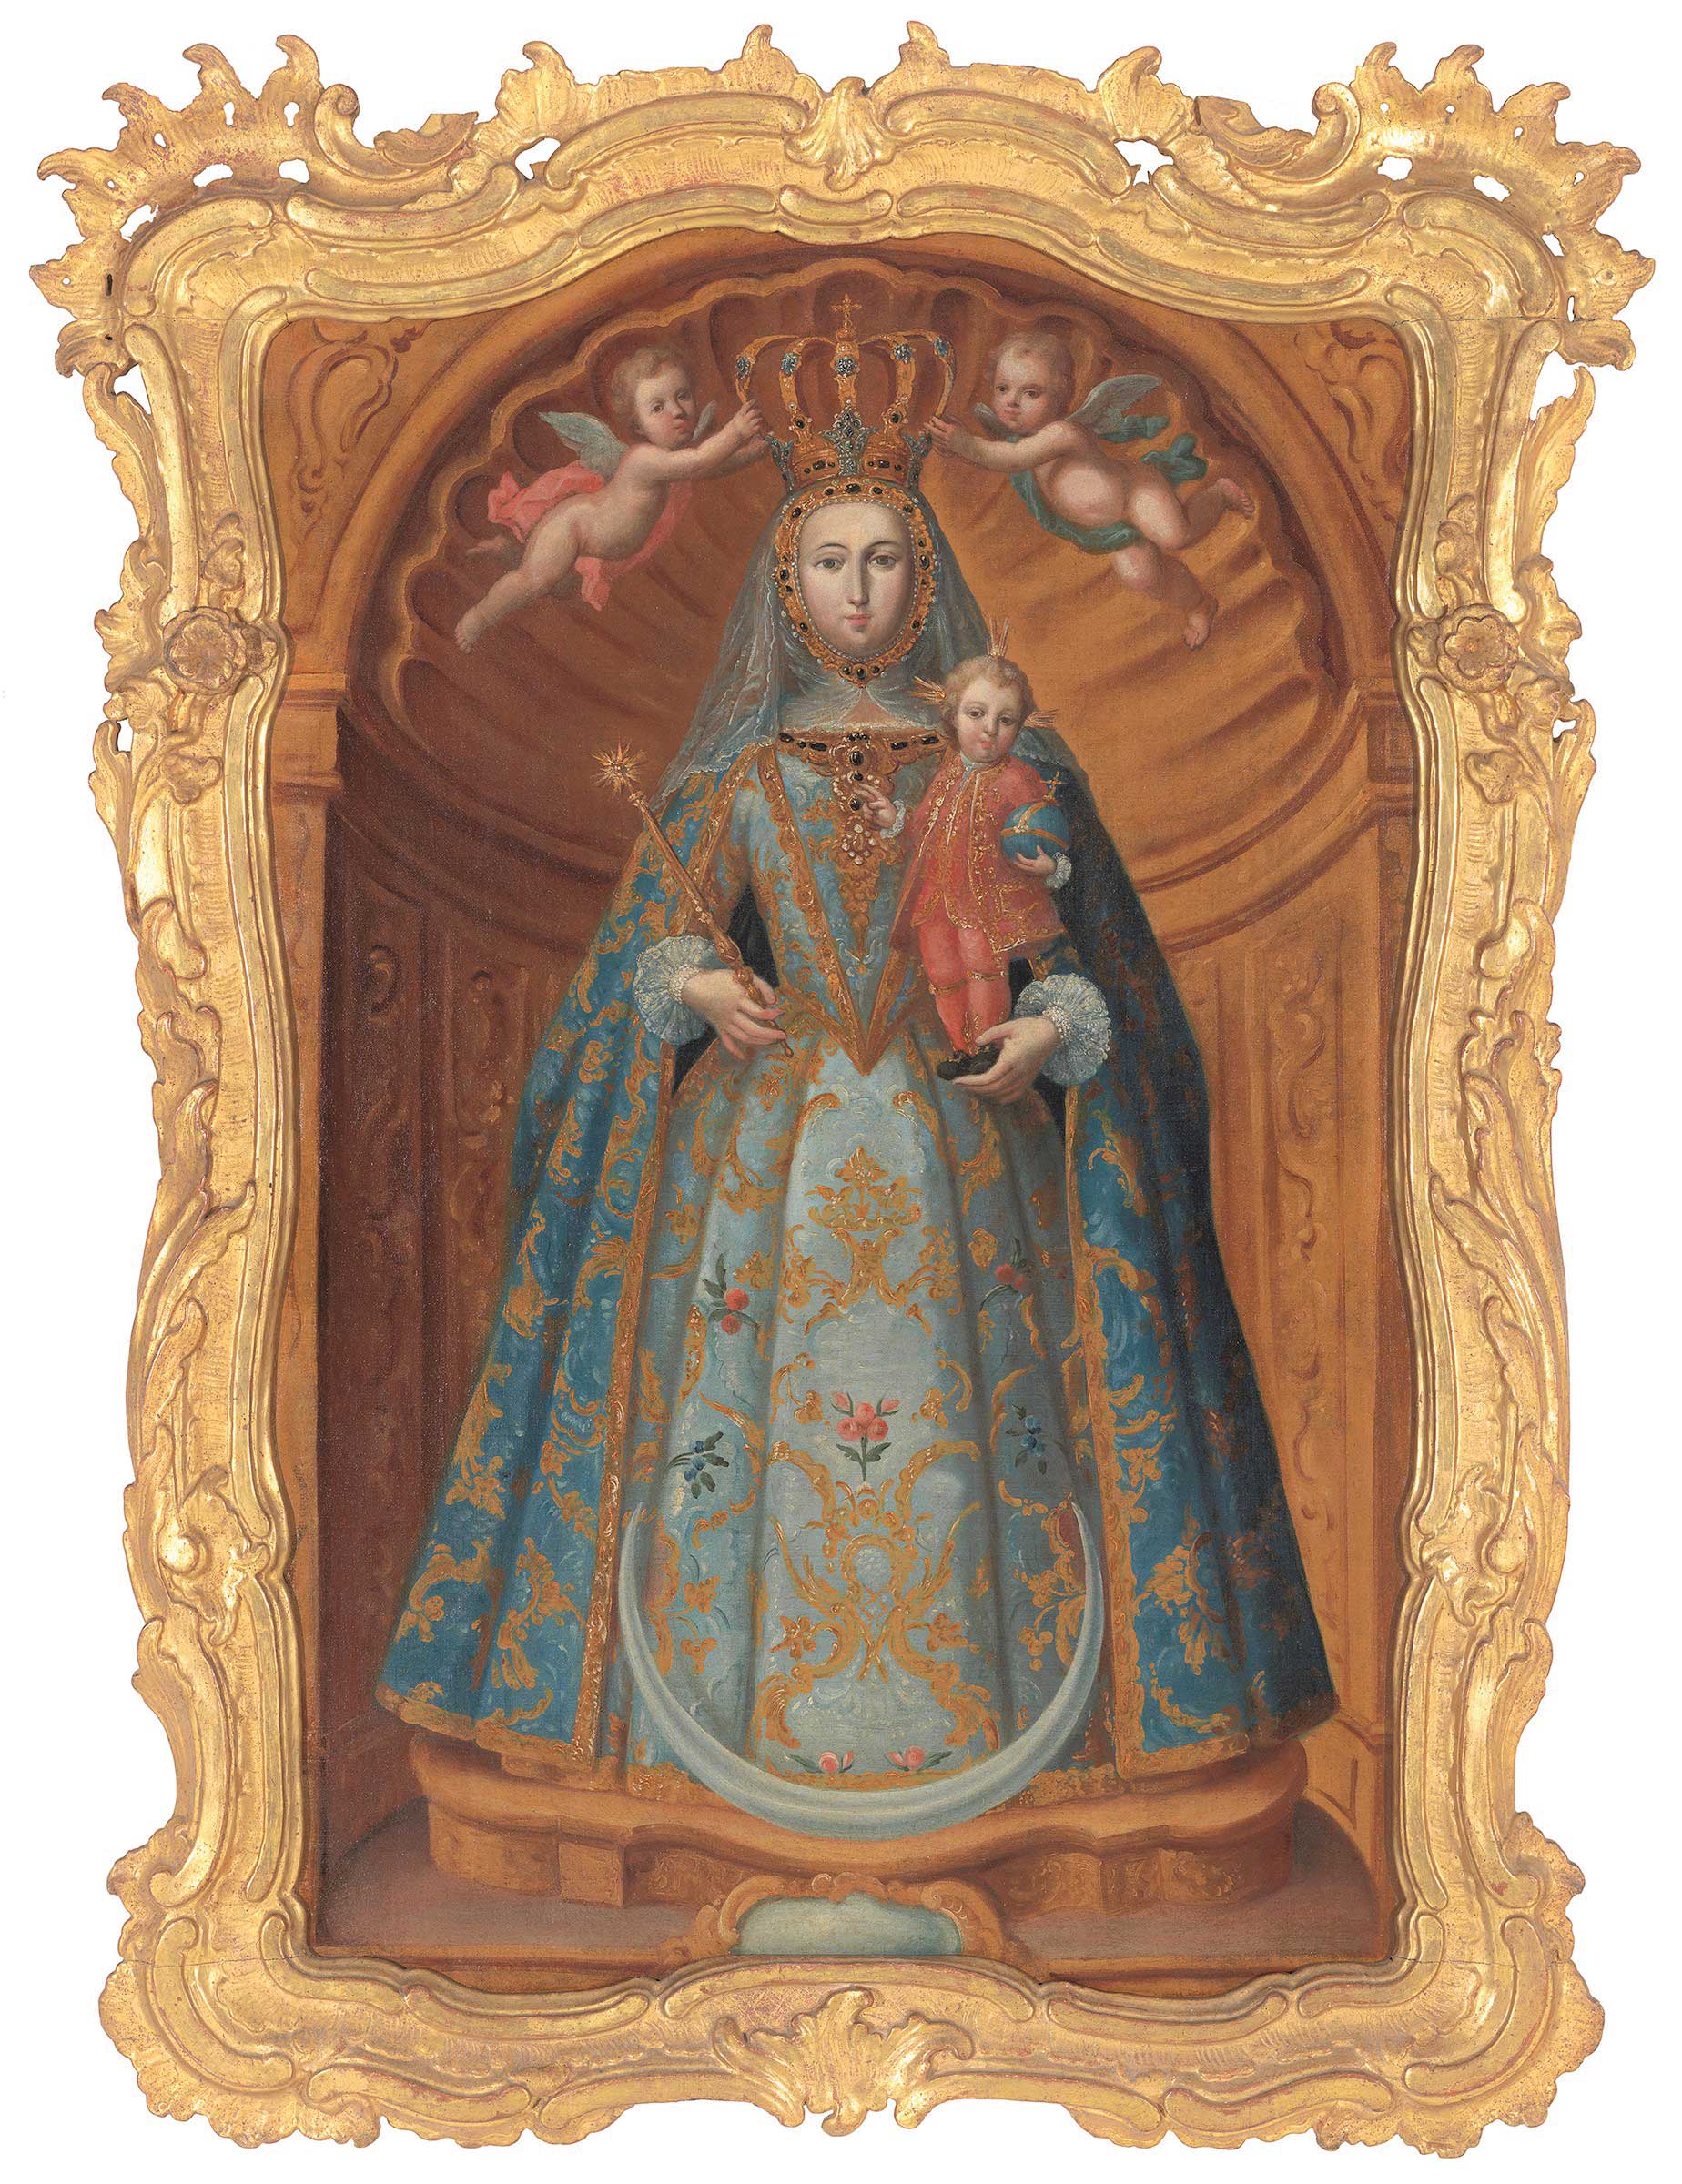 Juan Pedro López (1724–1787), "Our Lady of Guidance," c. 1765–70, oil on canvas, 41 5/16 x 26 1/2 in., Carl & Marilynn Thoma Collection, TL42430.25, photo: Jamie Stukenberg